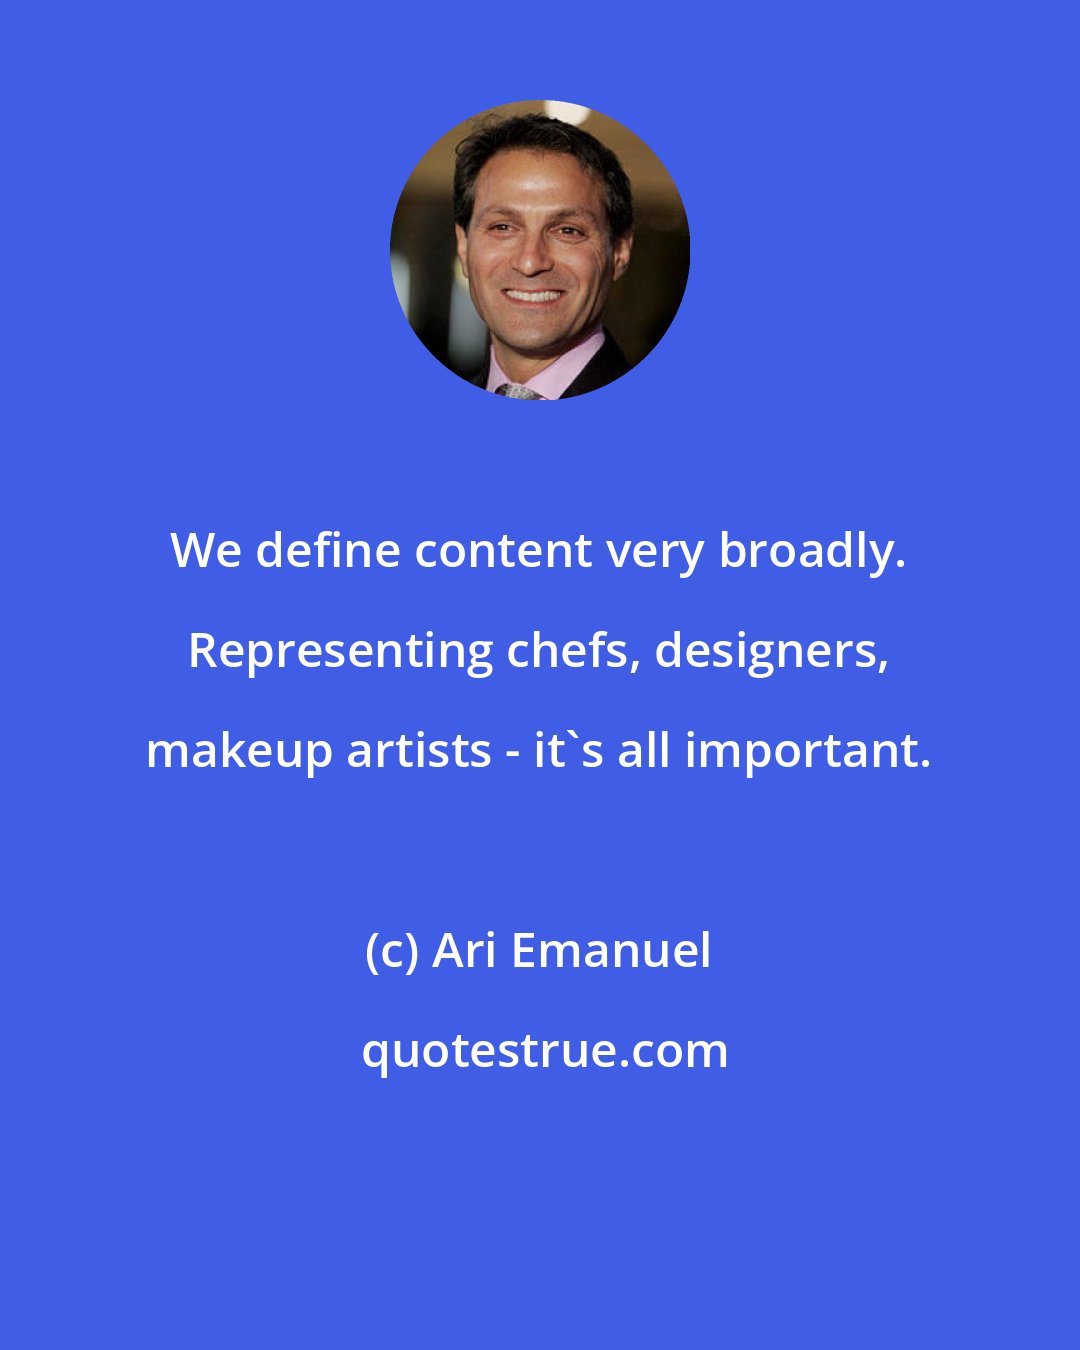 Ari Emanuel: We define content very broadly. Representing chefs, designers, makeup artists - it's all important.